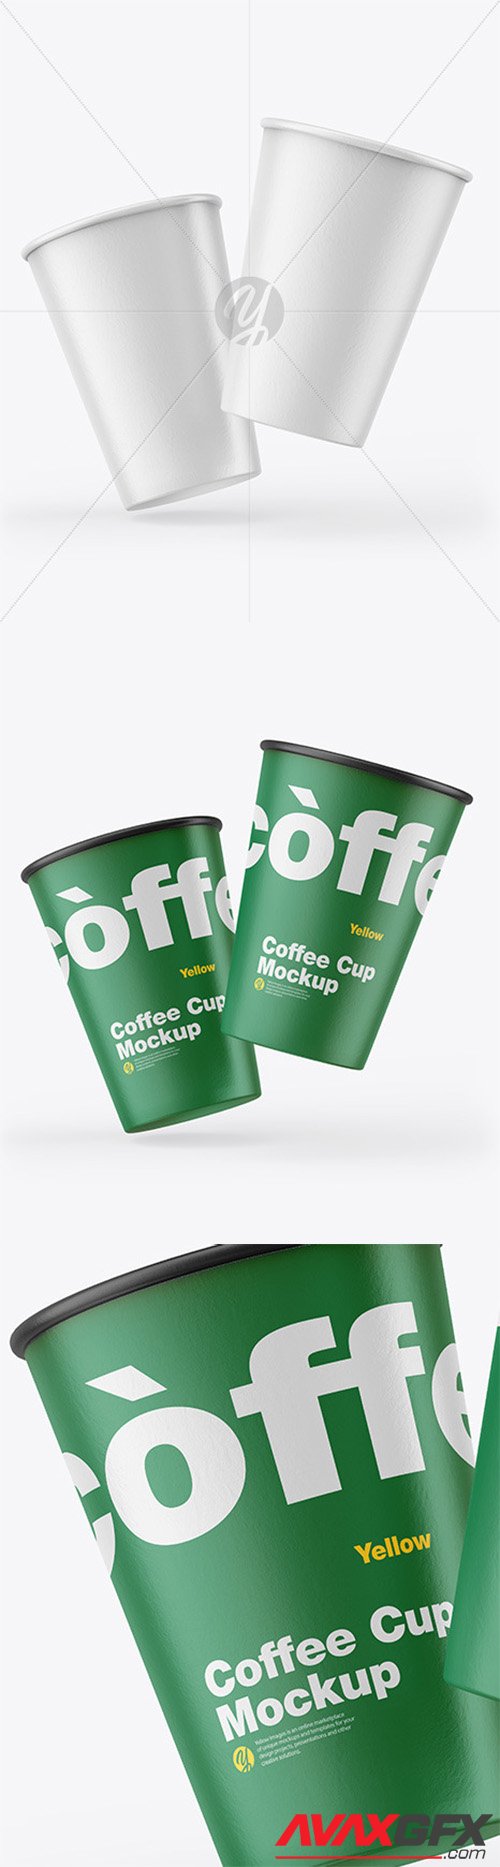 Download Matte Coffee Cups Mockup 55462 Avaxgfx All Downloads That You Need In One Place Graphic From Nitroflare Rapidgator PSD Mockup Templates